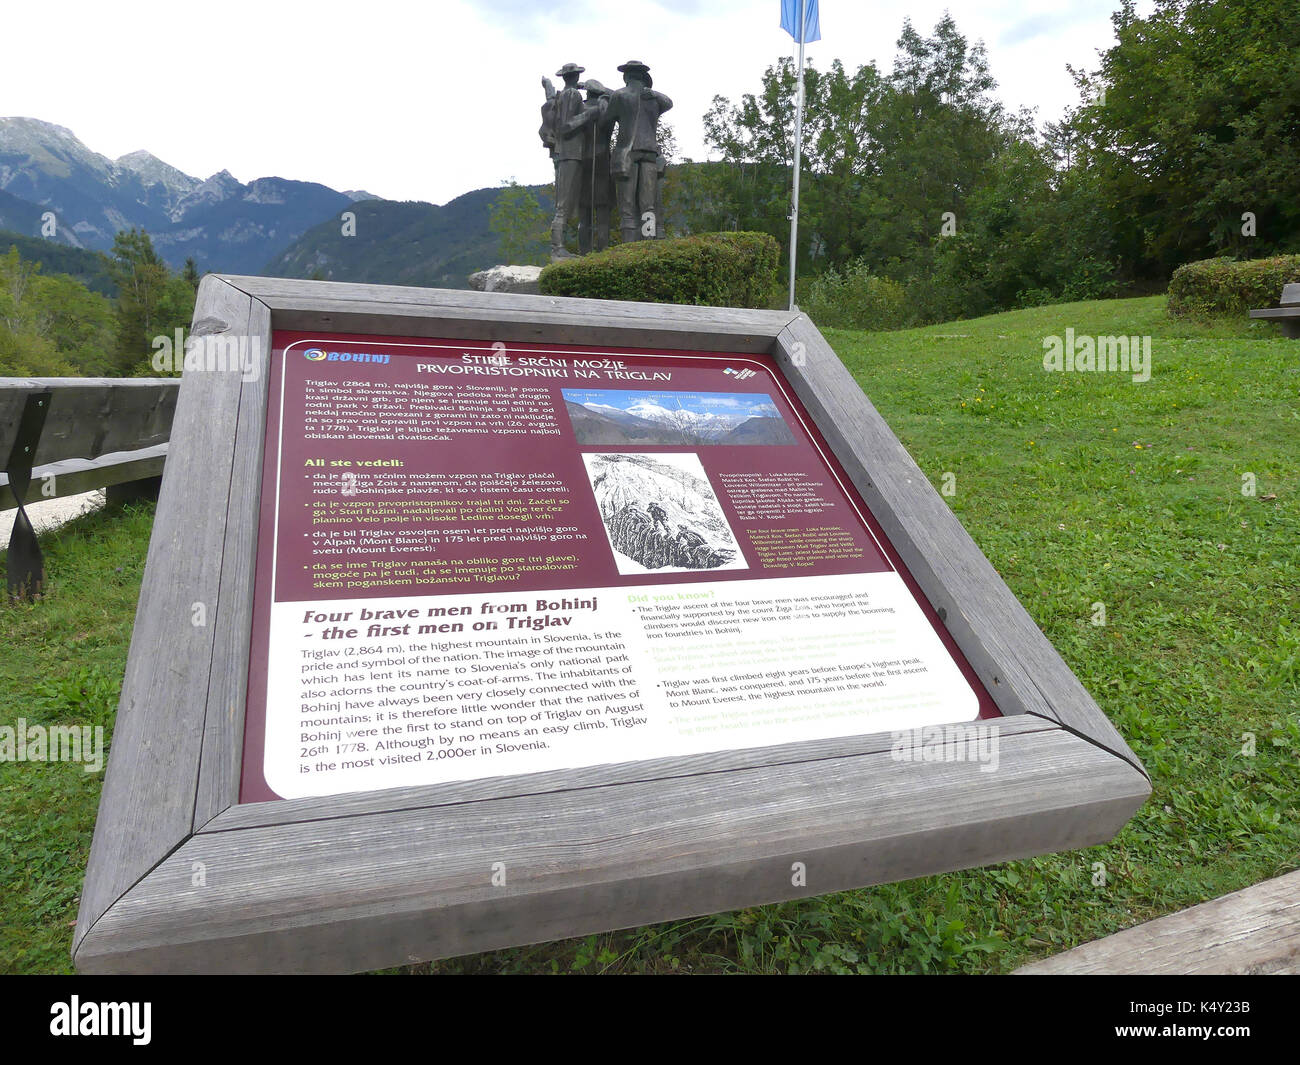 SLOVENIA  Monument in Bled to the pioneer climbers of Mount Triglav in 1778. Photo: Tony Gale Stock Photo